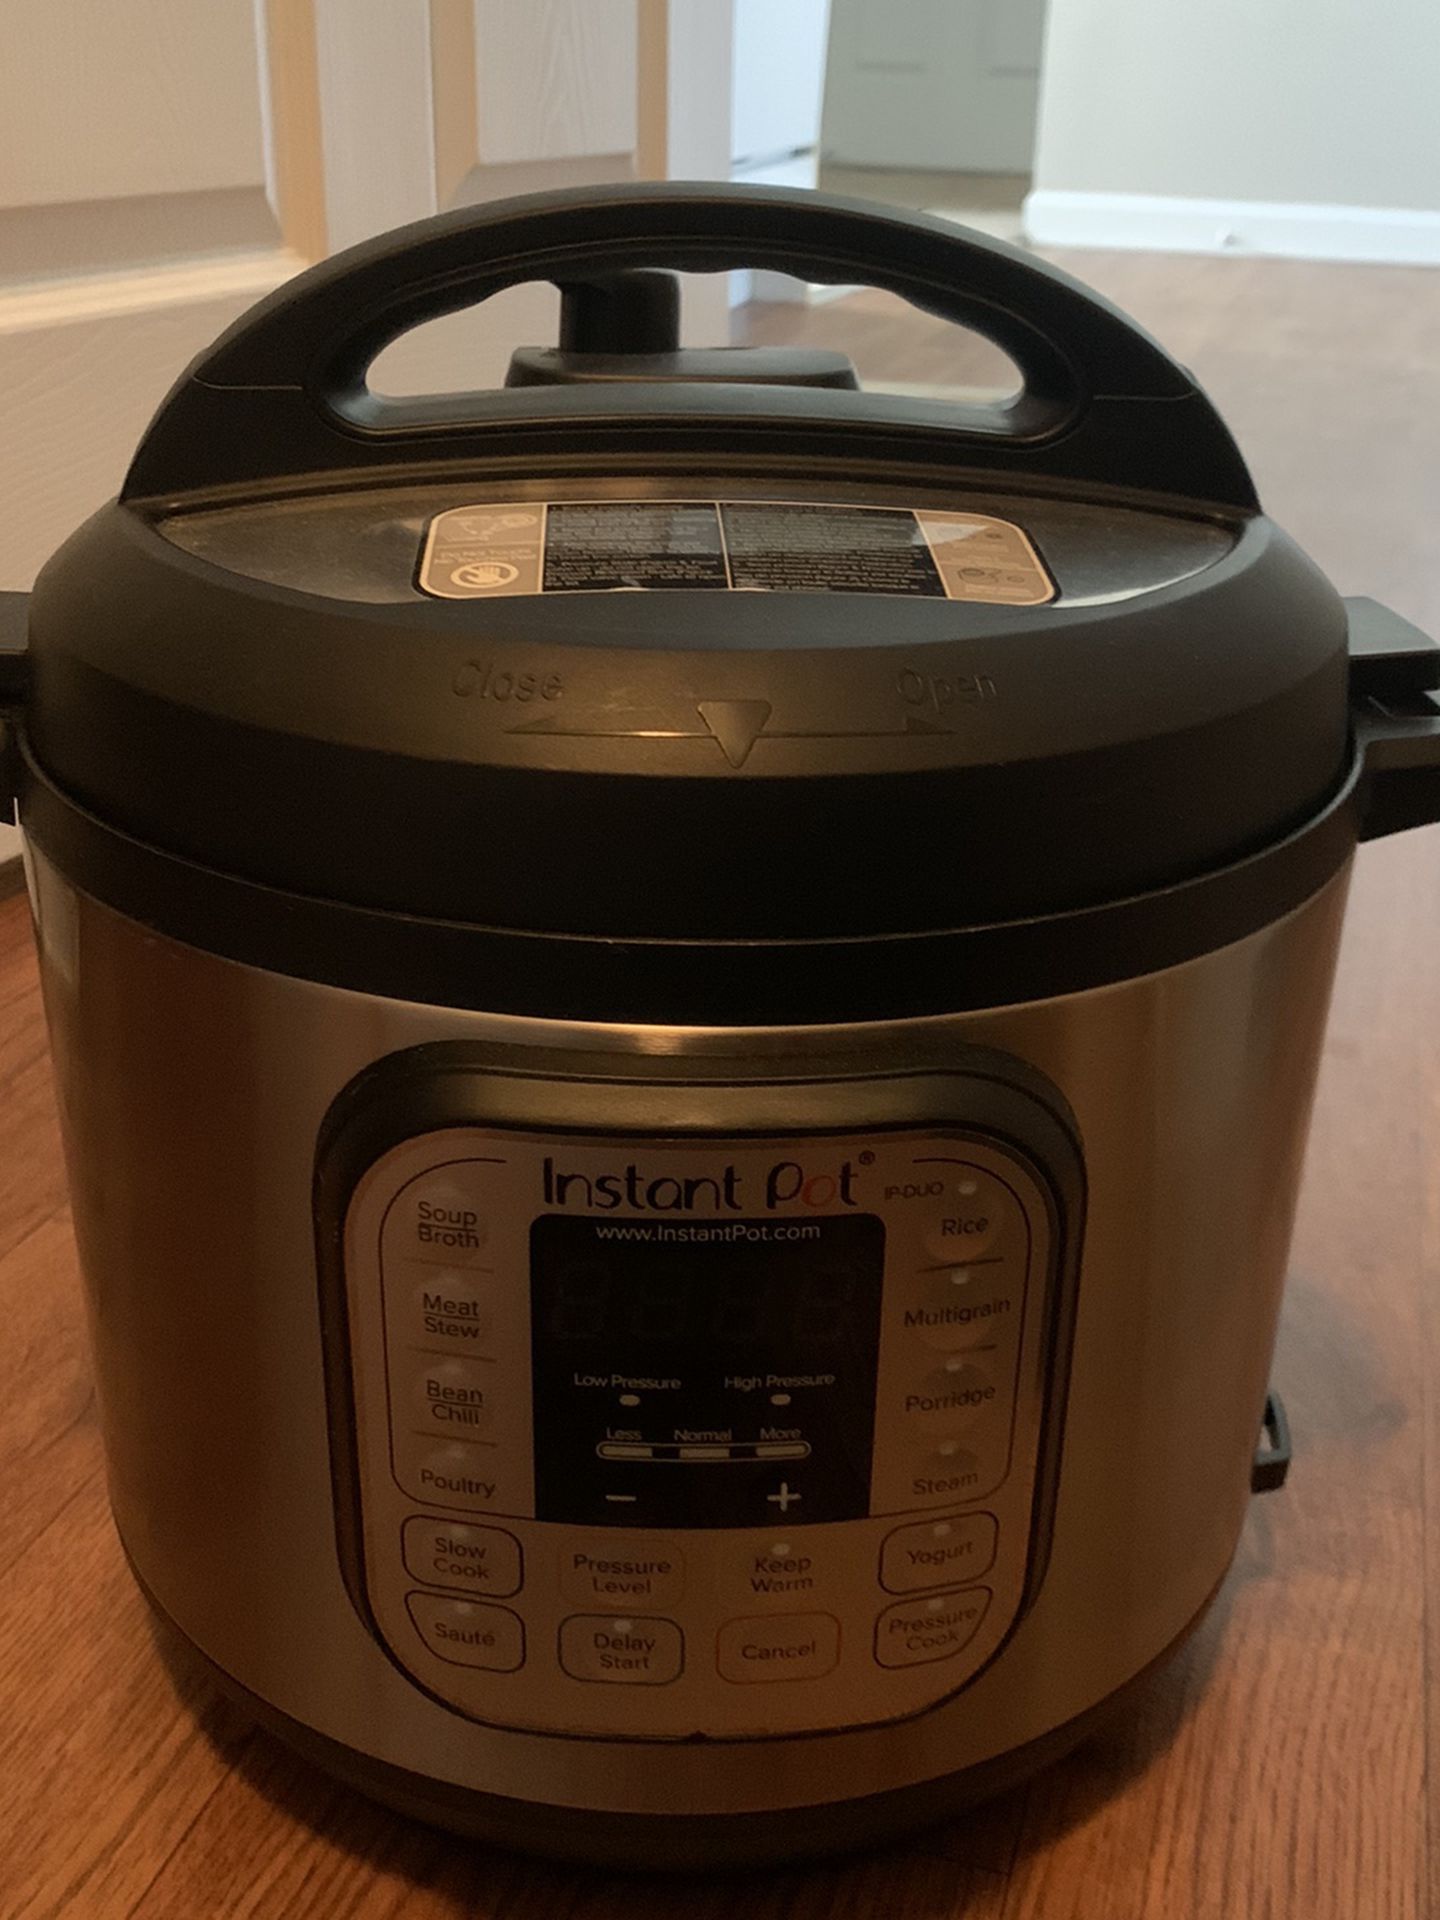 Used Instant Pot — Fairly New